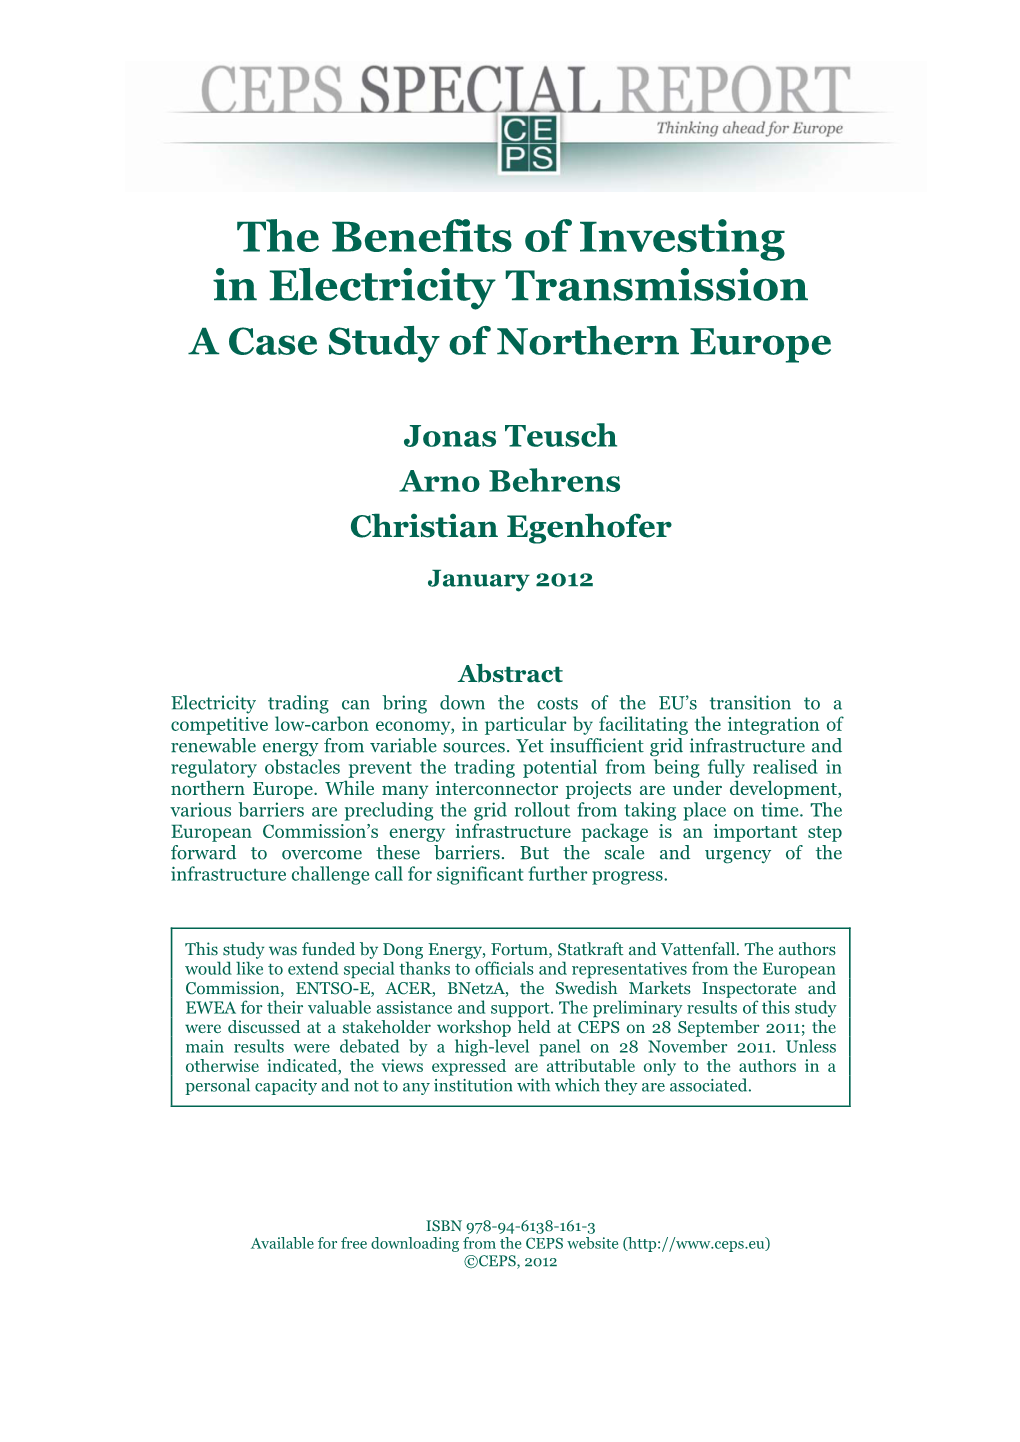 The Benefits of Investing in Electricity Transmission a Case Study of Northern Europe